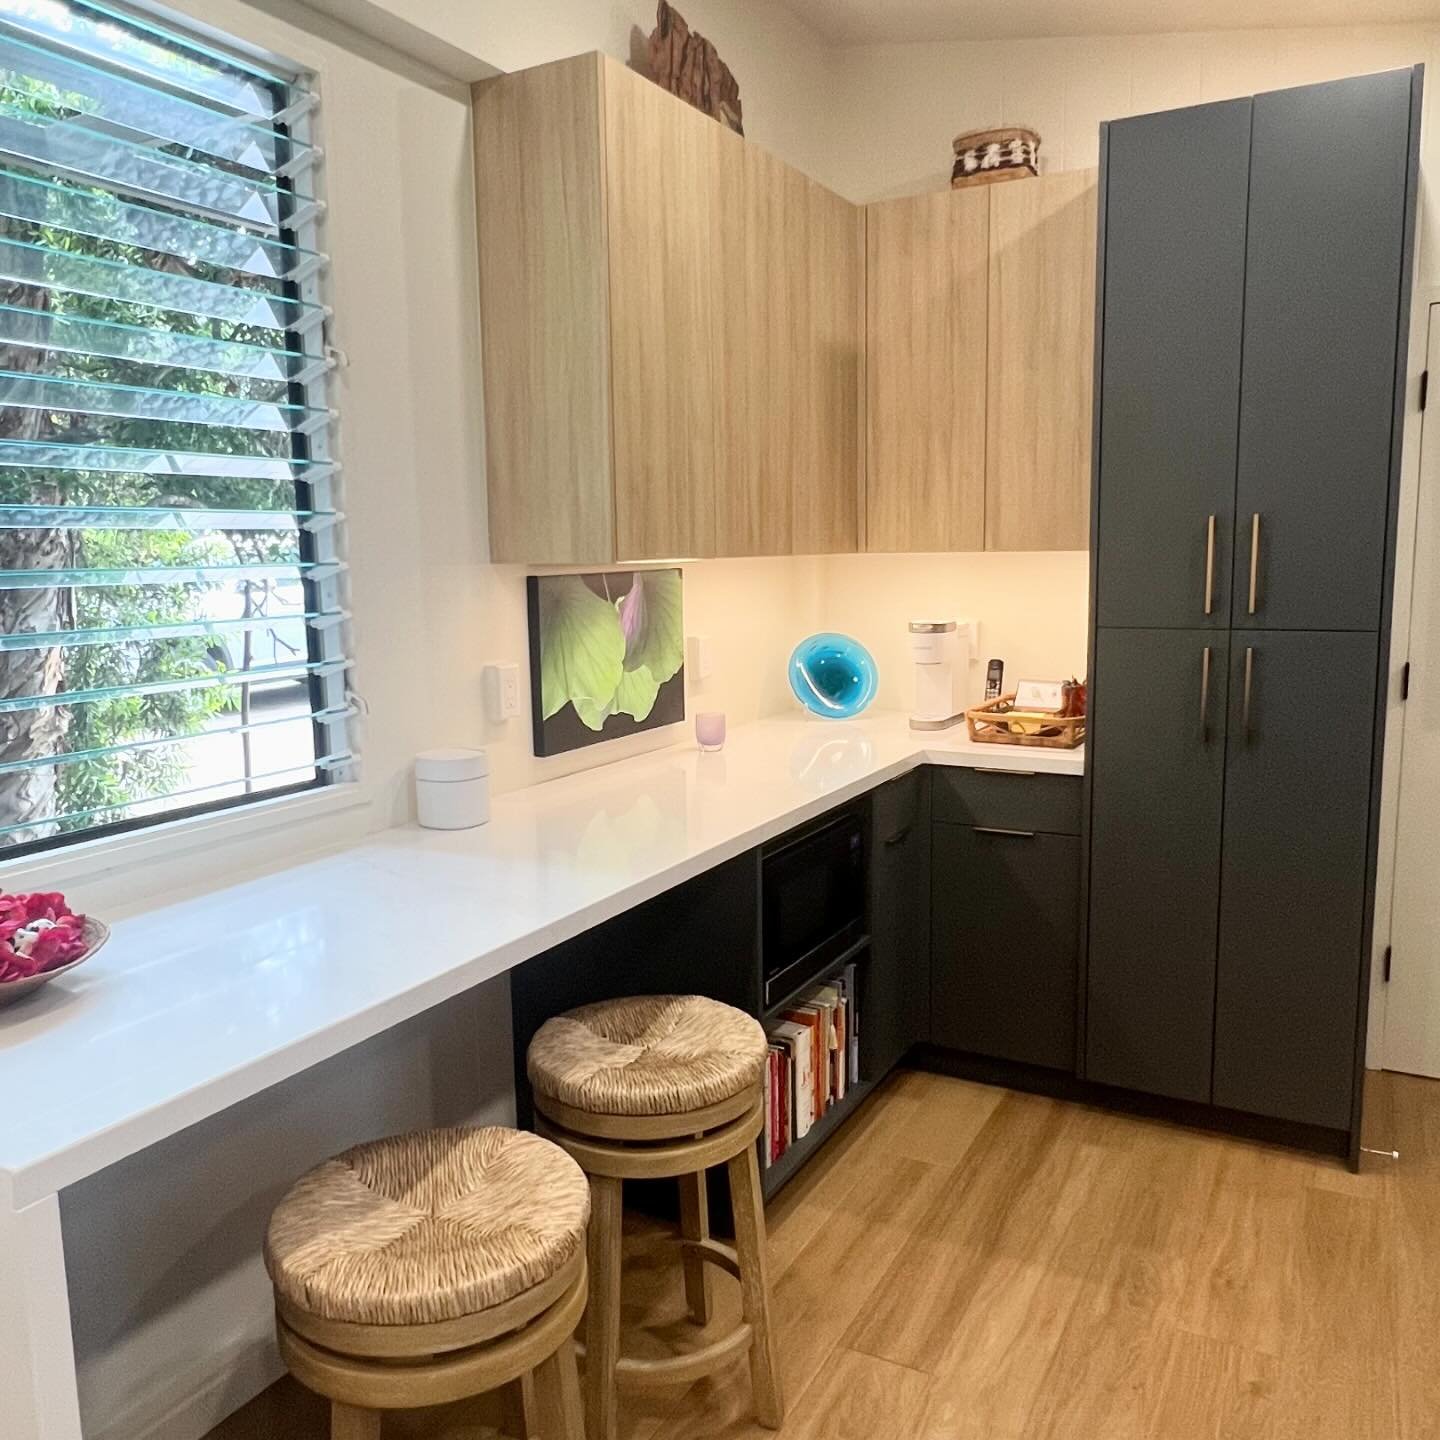 The eating nook of this kitchen includes a pantry for additional storage and a convenient microwave cubby.  The homeowners wanted a space to enjoy casual meals and morning coffee without taking up too much room in a small kitchen.  A cubby cabinet ke